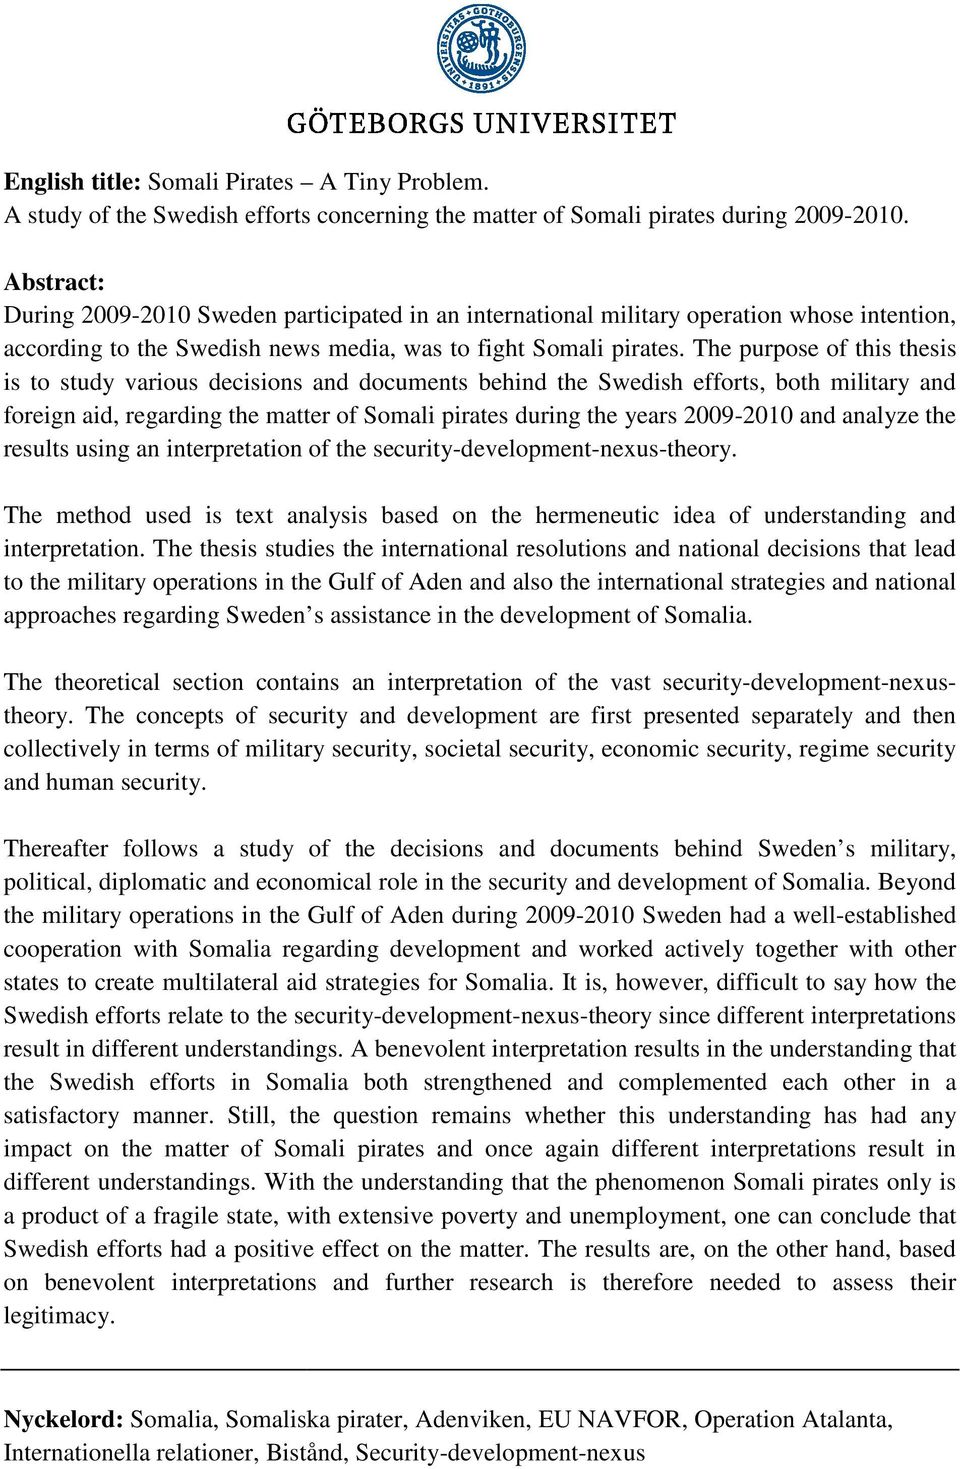 The purpose of this thesis is to study various decisions and documents behind the Swedish efforts, both military and foreign aid, regarding the matter of Somali pirates during the years 2009-20102010